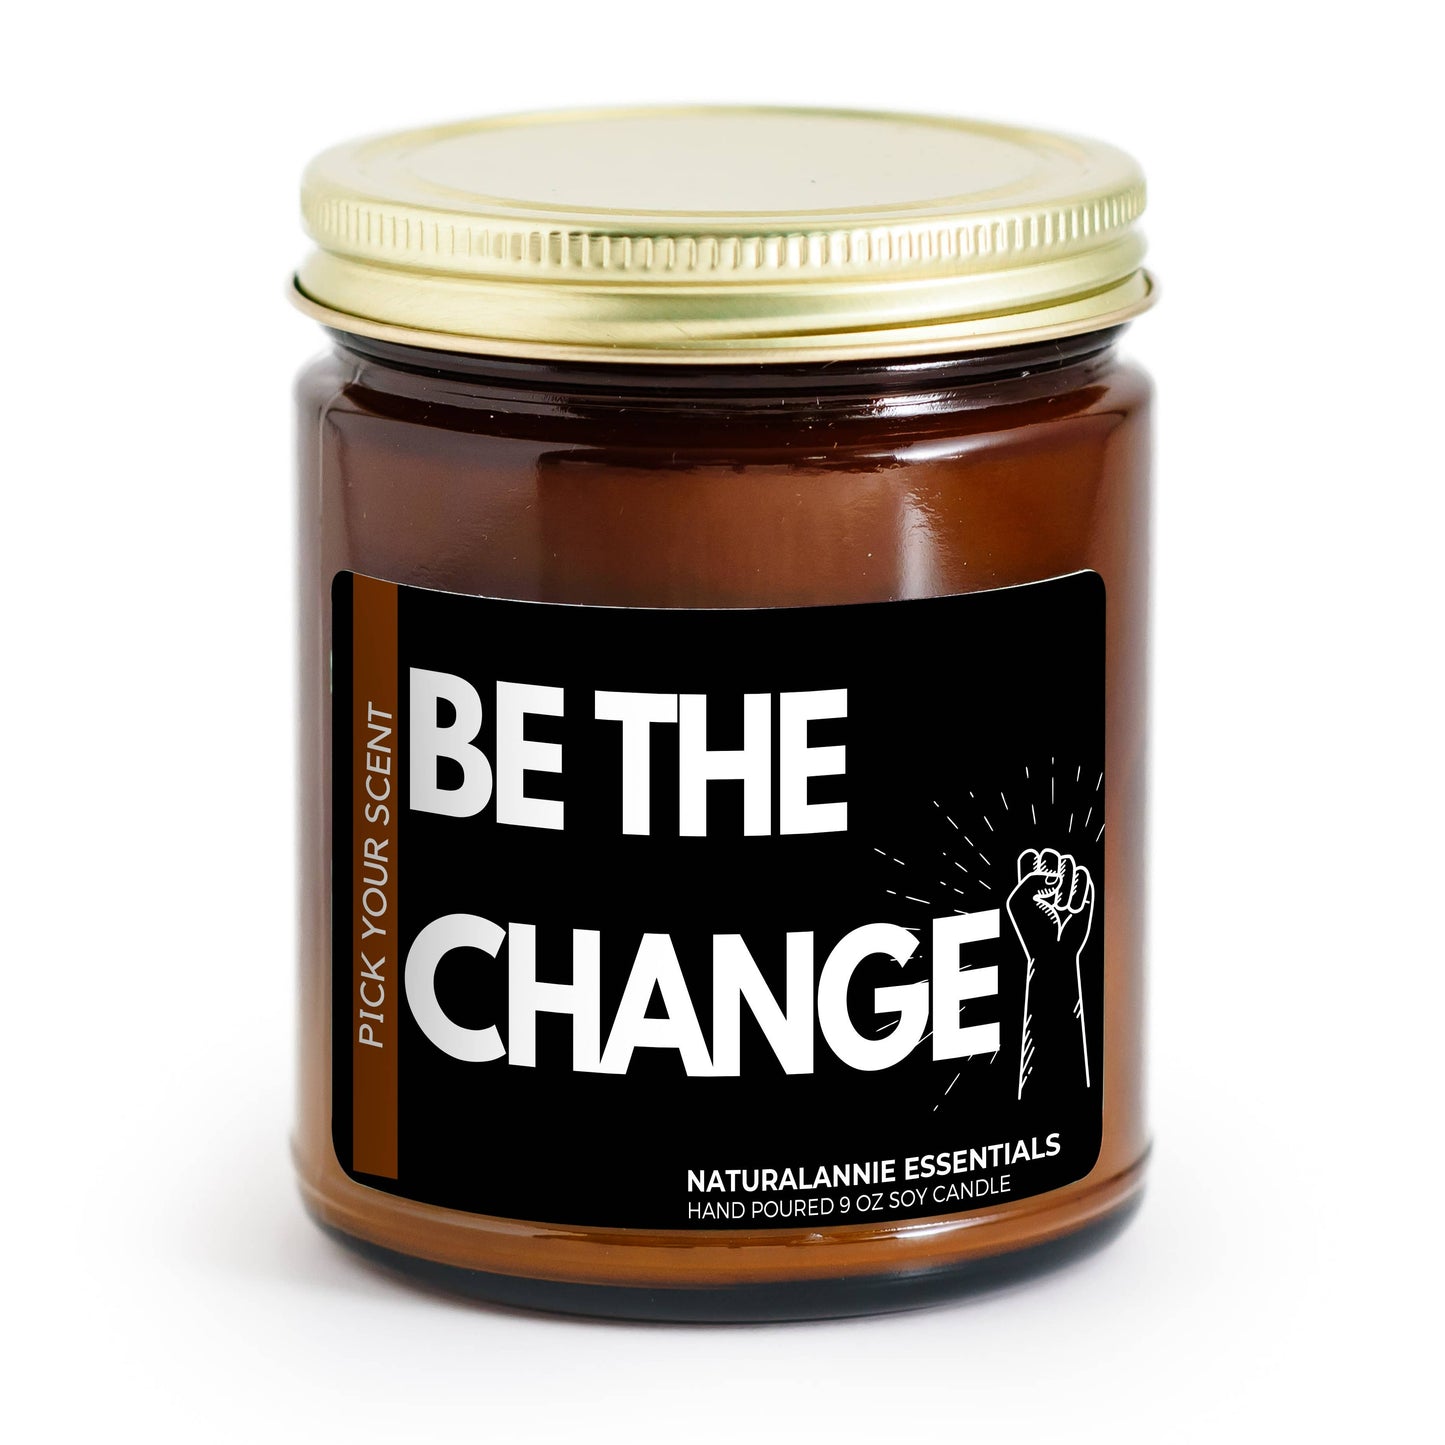 Be The Change! Soy Candle 9oz